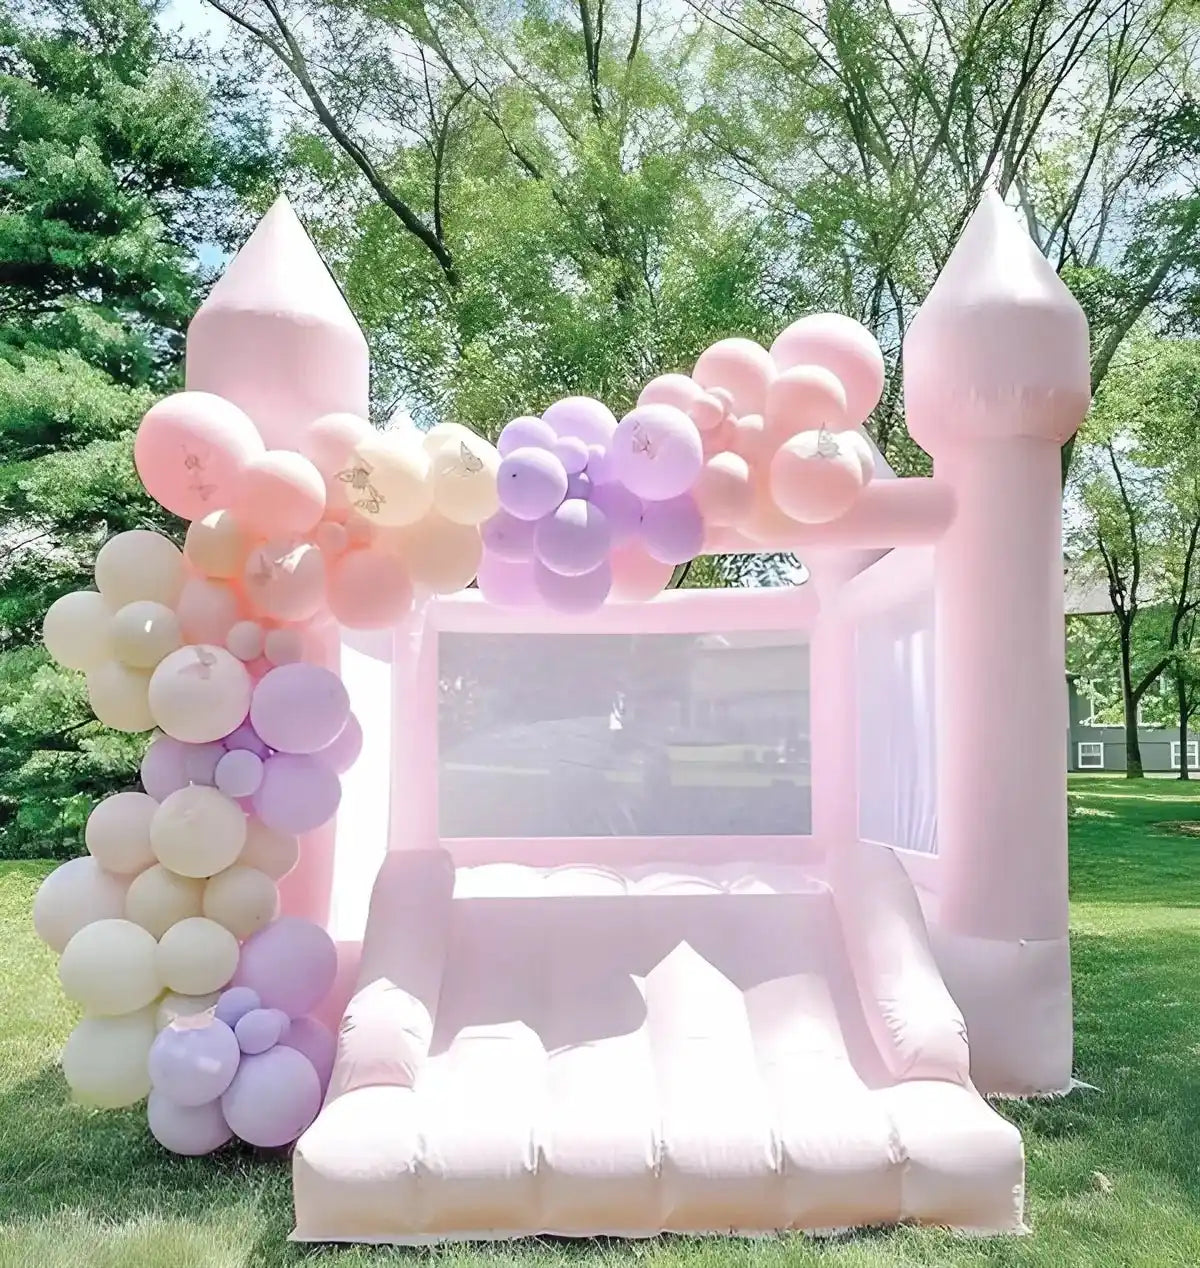 The Pastel Little Bounce, a pink mini bounce house, decorated with balloons in an outdoor park